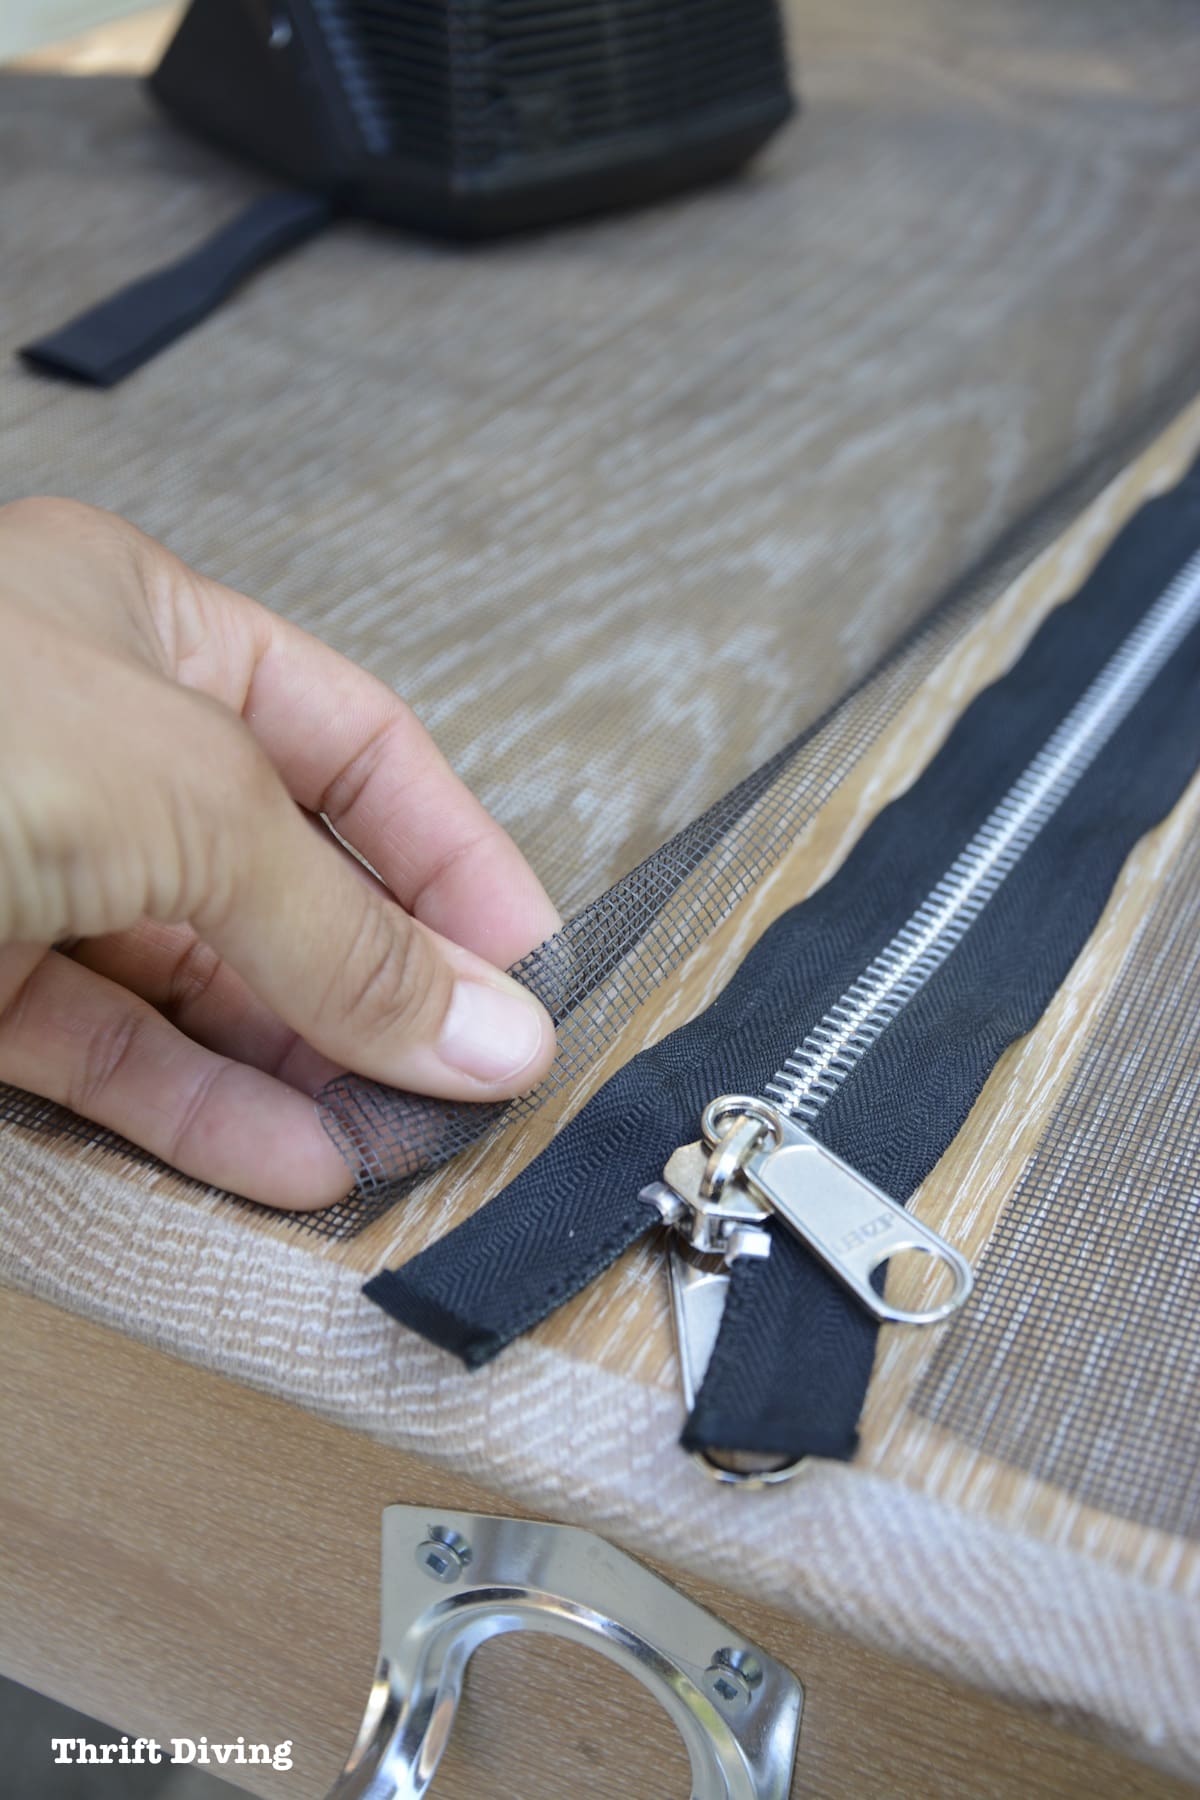 How to Make a Garage Door Screen with a heavy-duty zipper to keep out flying insects, such as mosquitos, stink bugs, bees, moths, flies, and gnats. - Thrift Diving